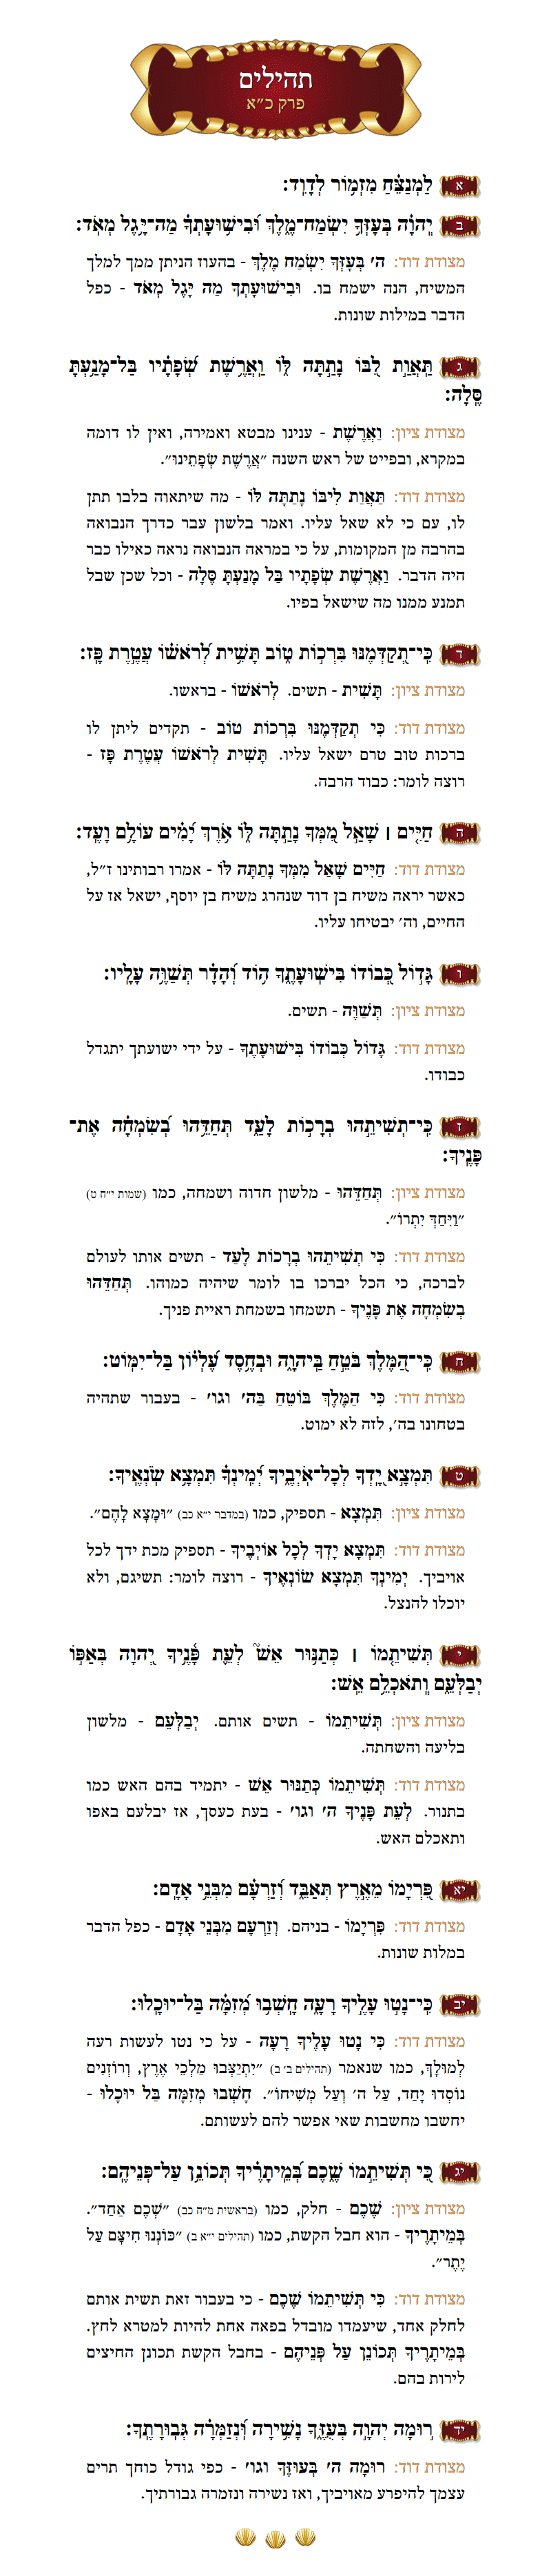 Sefer Tehillim Chapter 21 with commentary